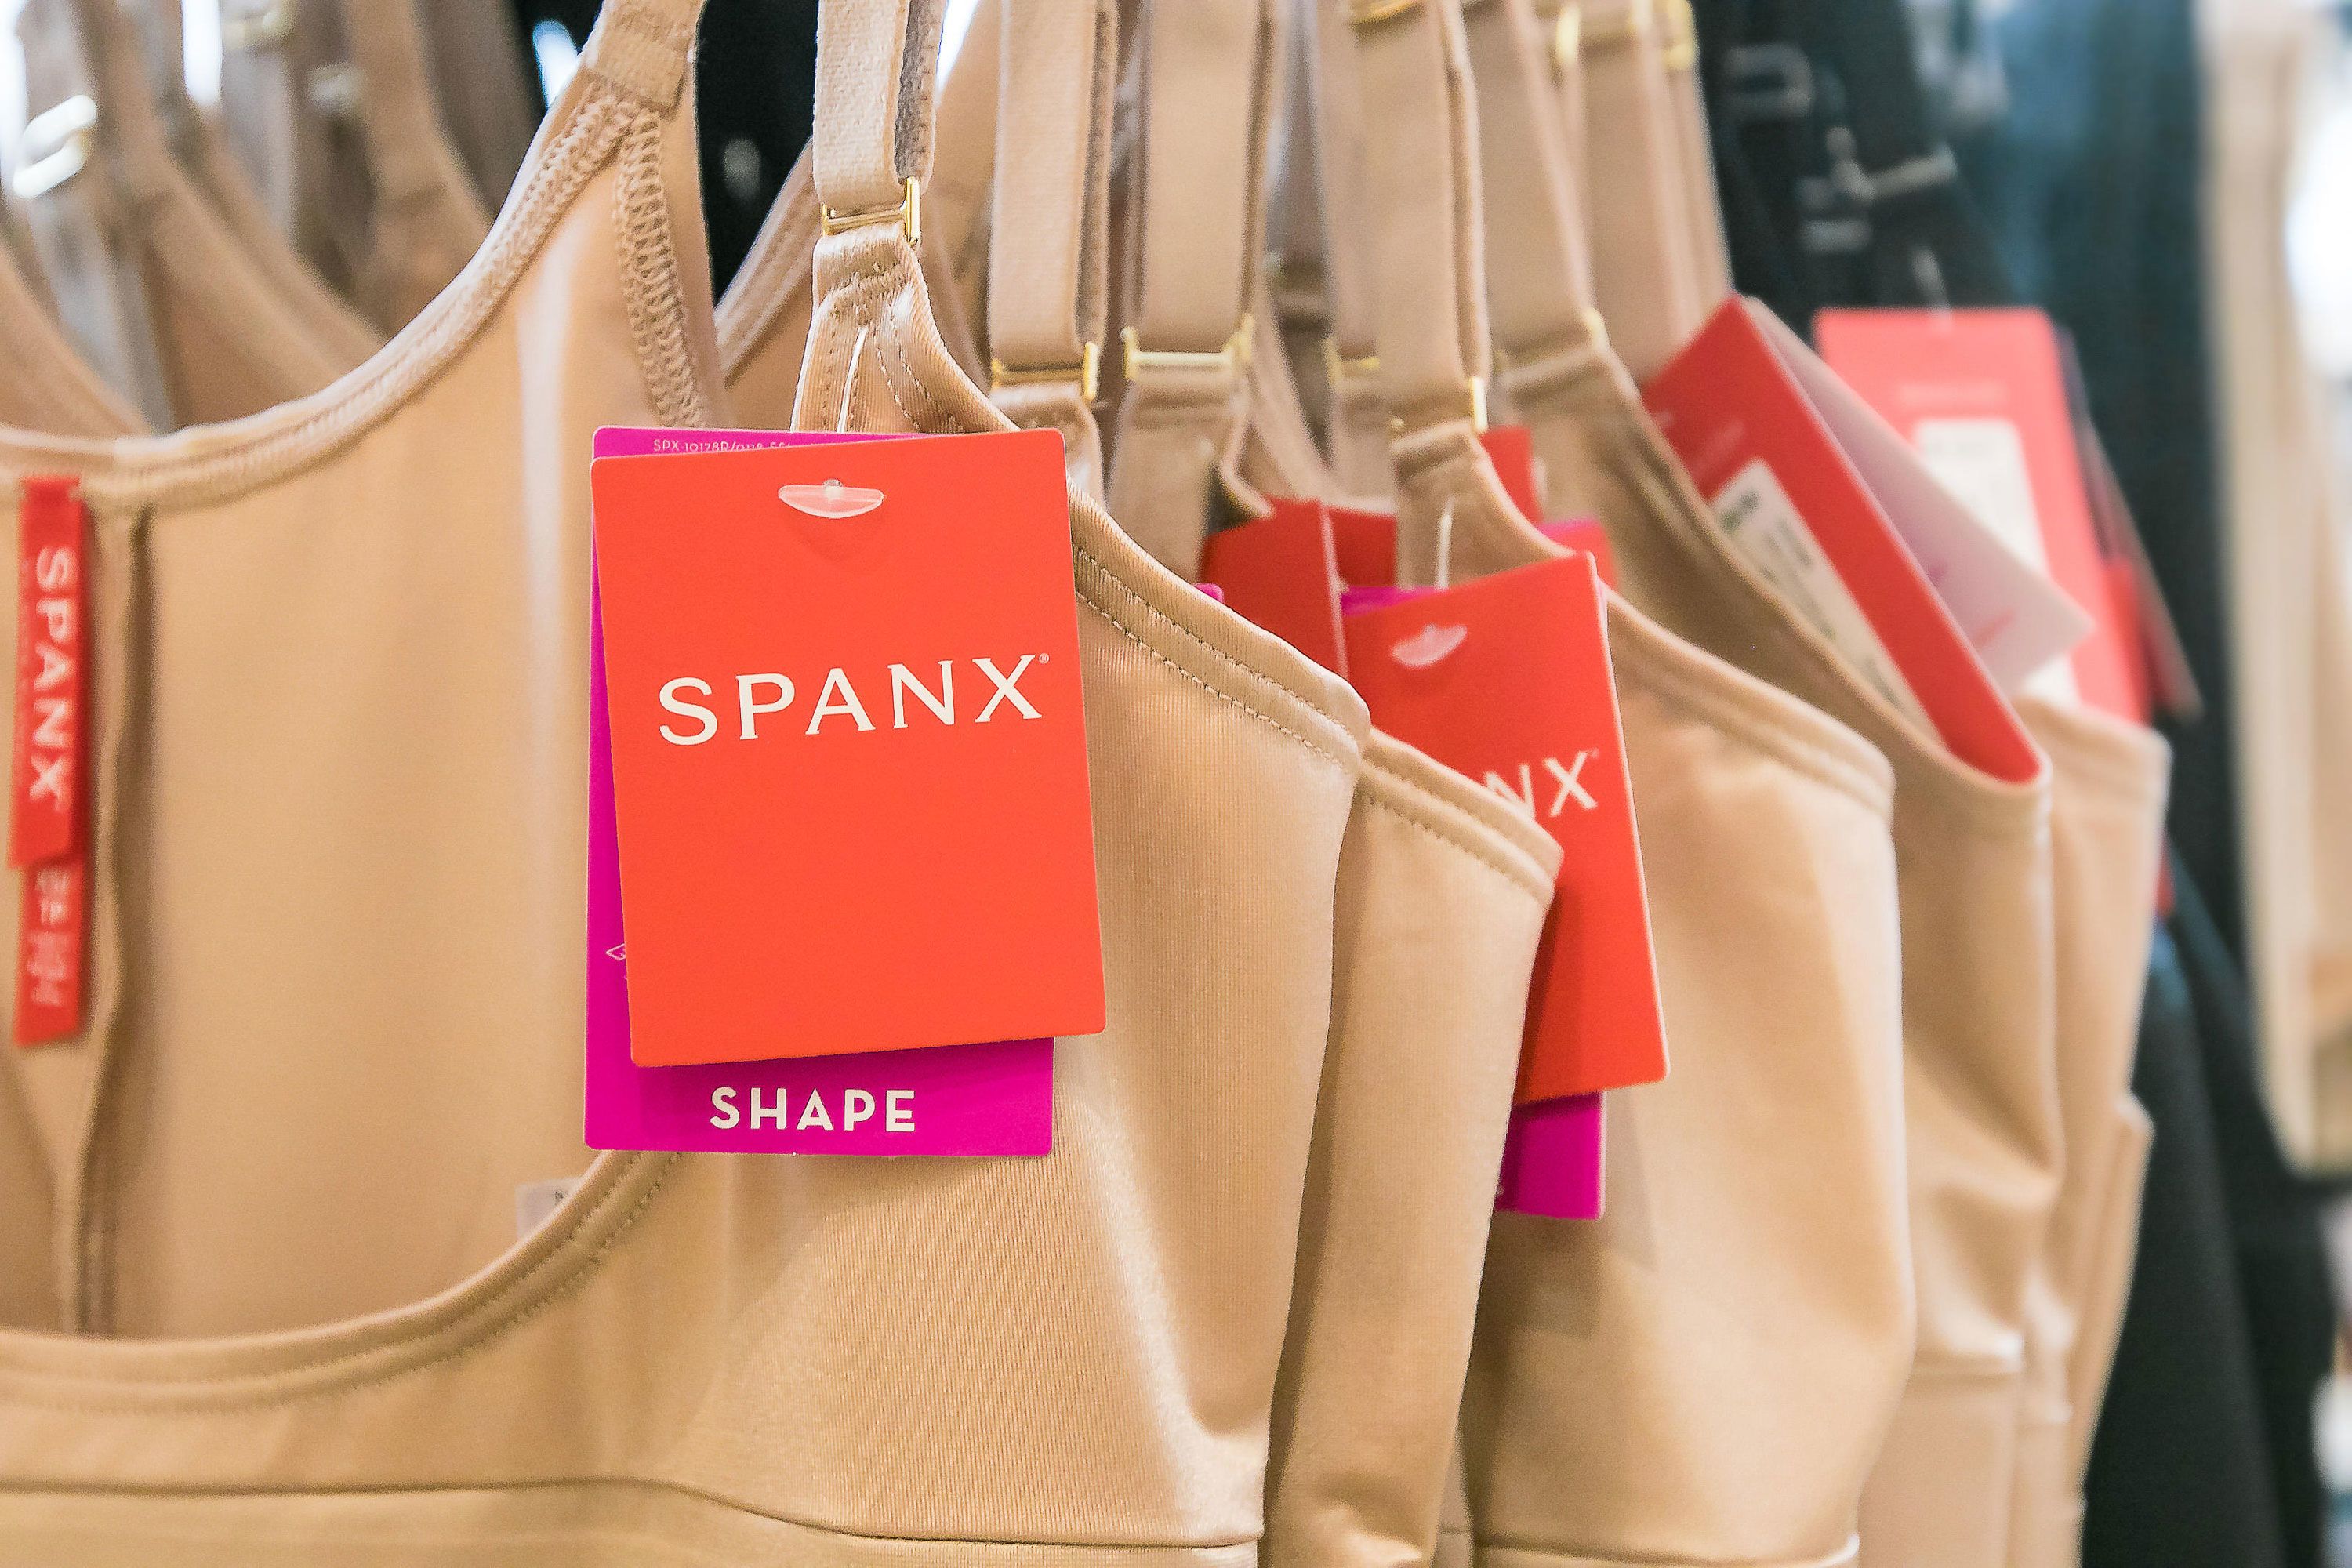 Fashion's 'Apple Vs. Samsung': Spanx Patent War Could Change How Brands  Fight Copycats